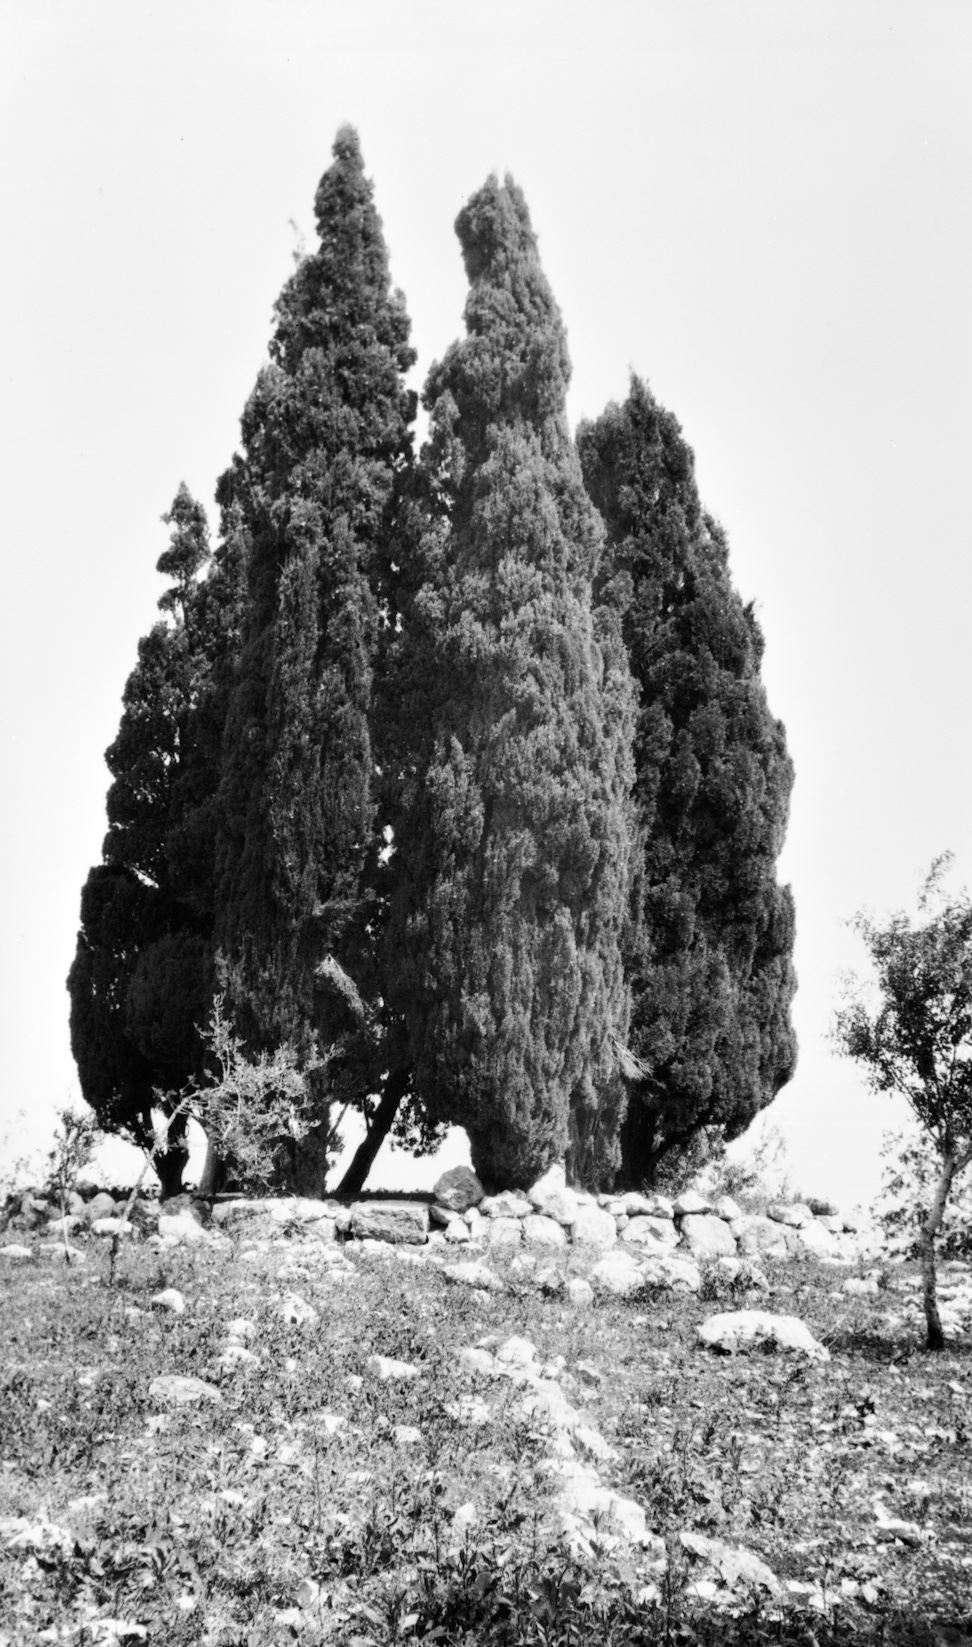 Cypress grove on the south side of the Shrine of the Báb, where Bahá’u’lláh indicated to ‘Abdu’l-Bahá where the Shrine of the Báb was to be built, early 1900s